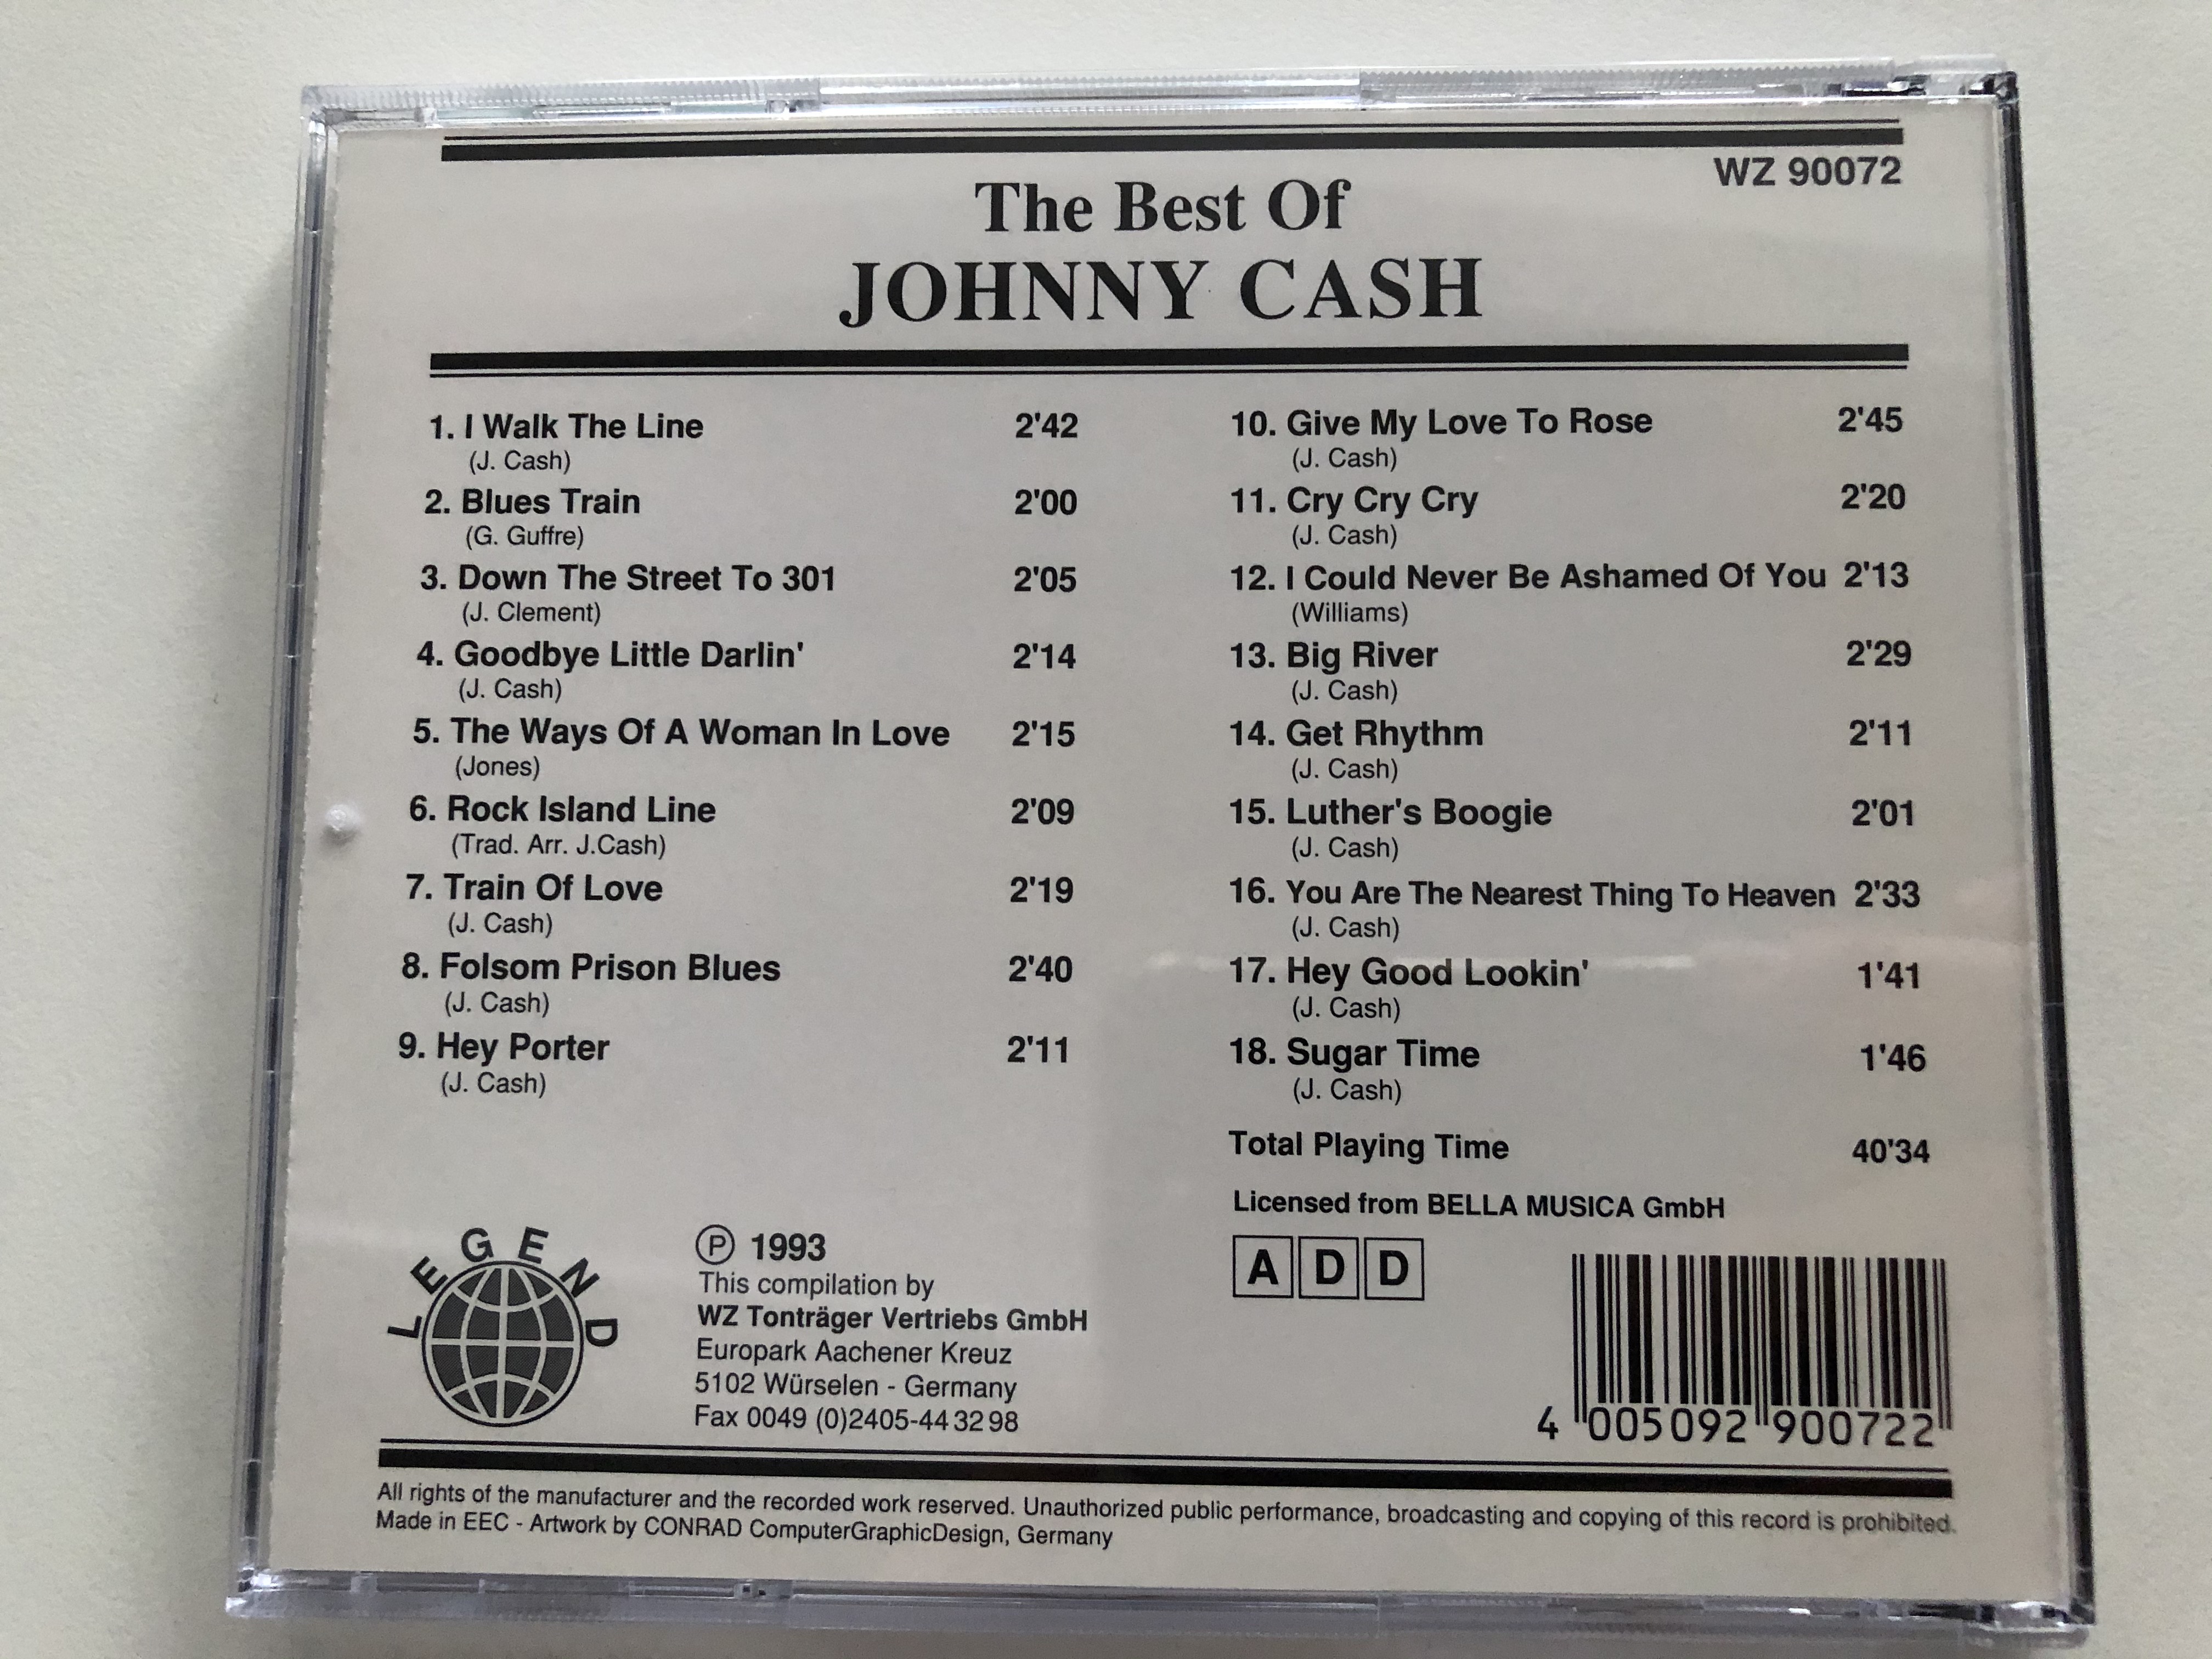 the-best-of-johnny-cash-i-walk-the-line-rock-island-line-hey-porter-hey-good-lookin-and-many-more...-wz-tontr-ger-vertriebs-gmbh-audio-cd-1993-wz-90072-3-.jpg